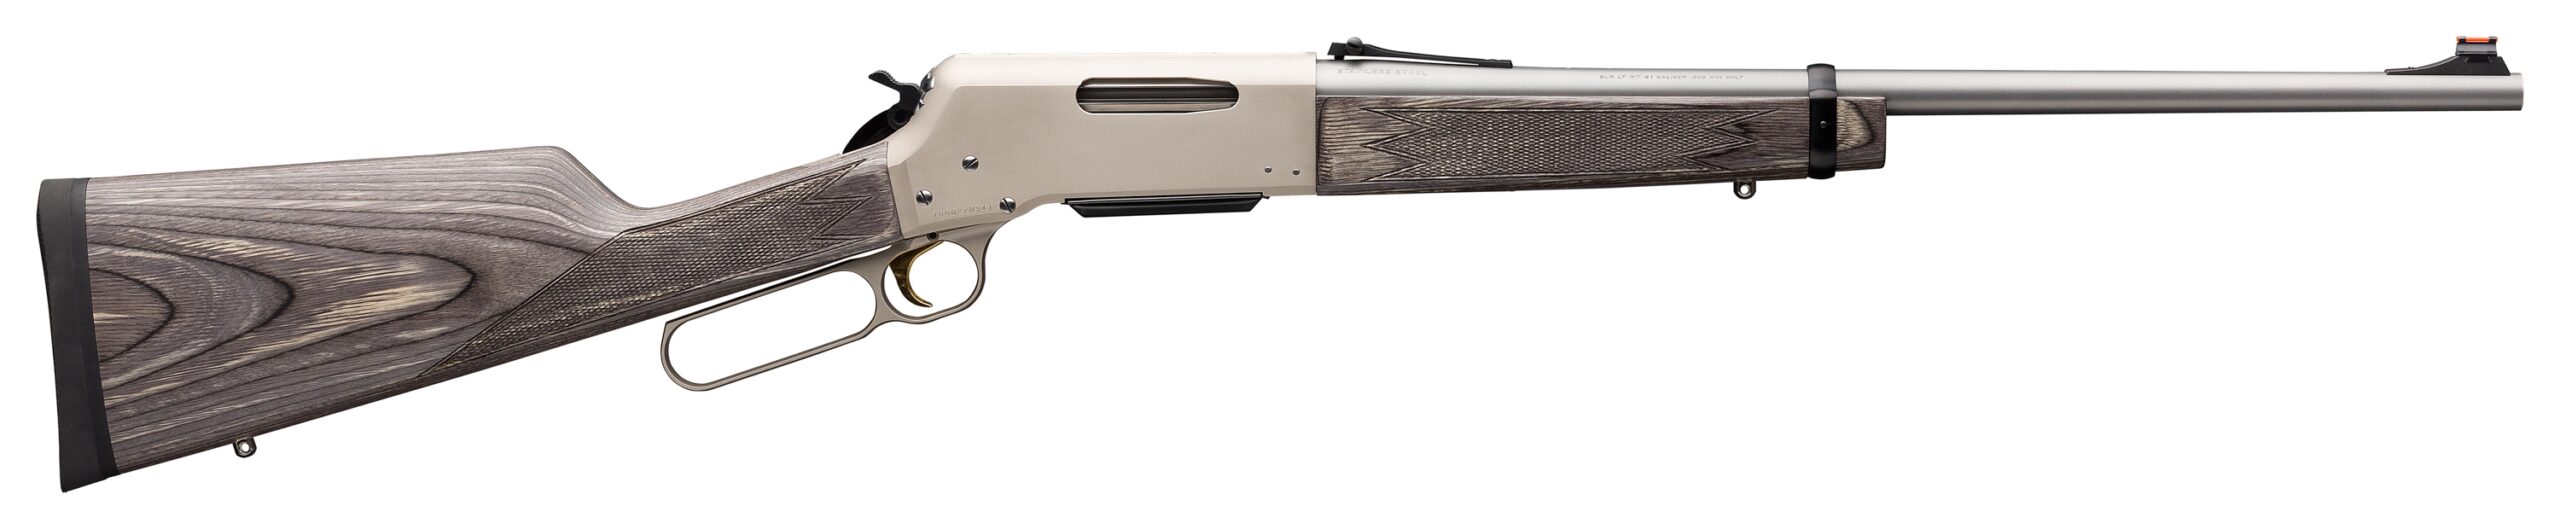 A browning BLR hunting rifle on a white background.